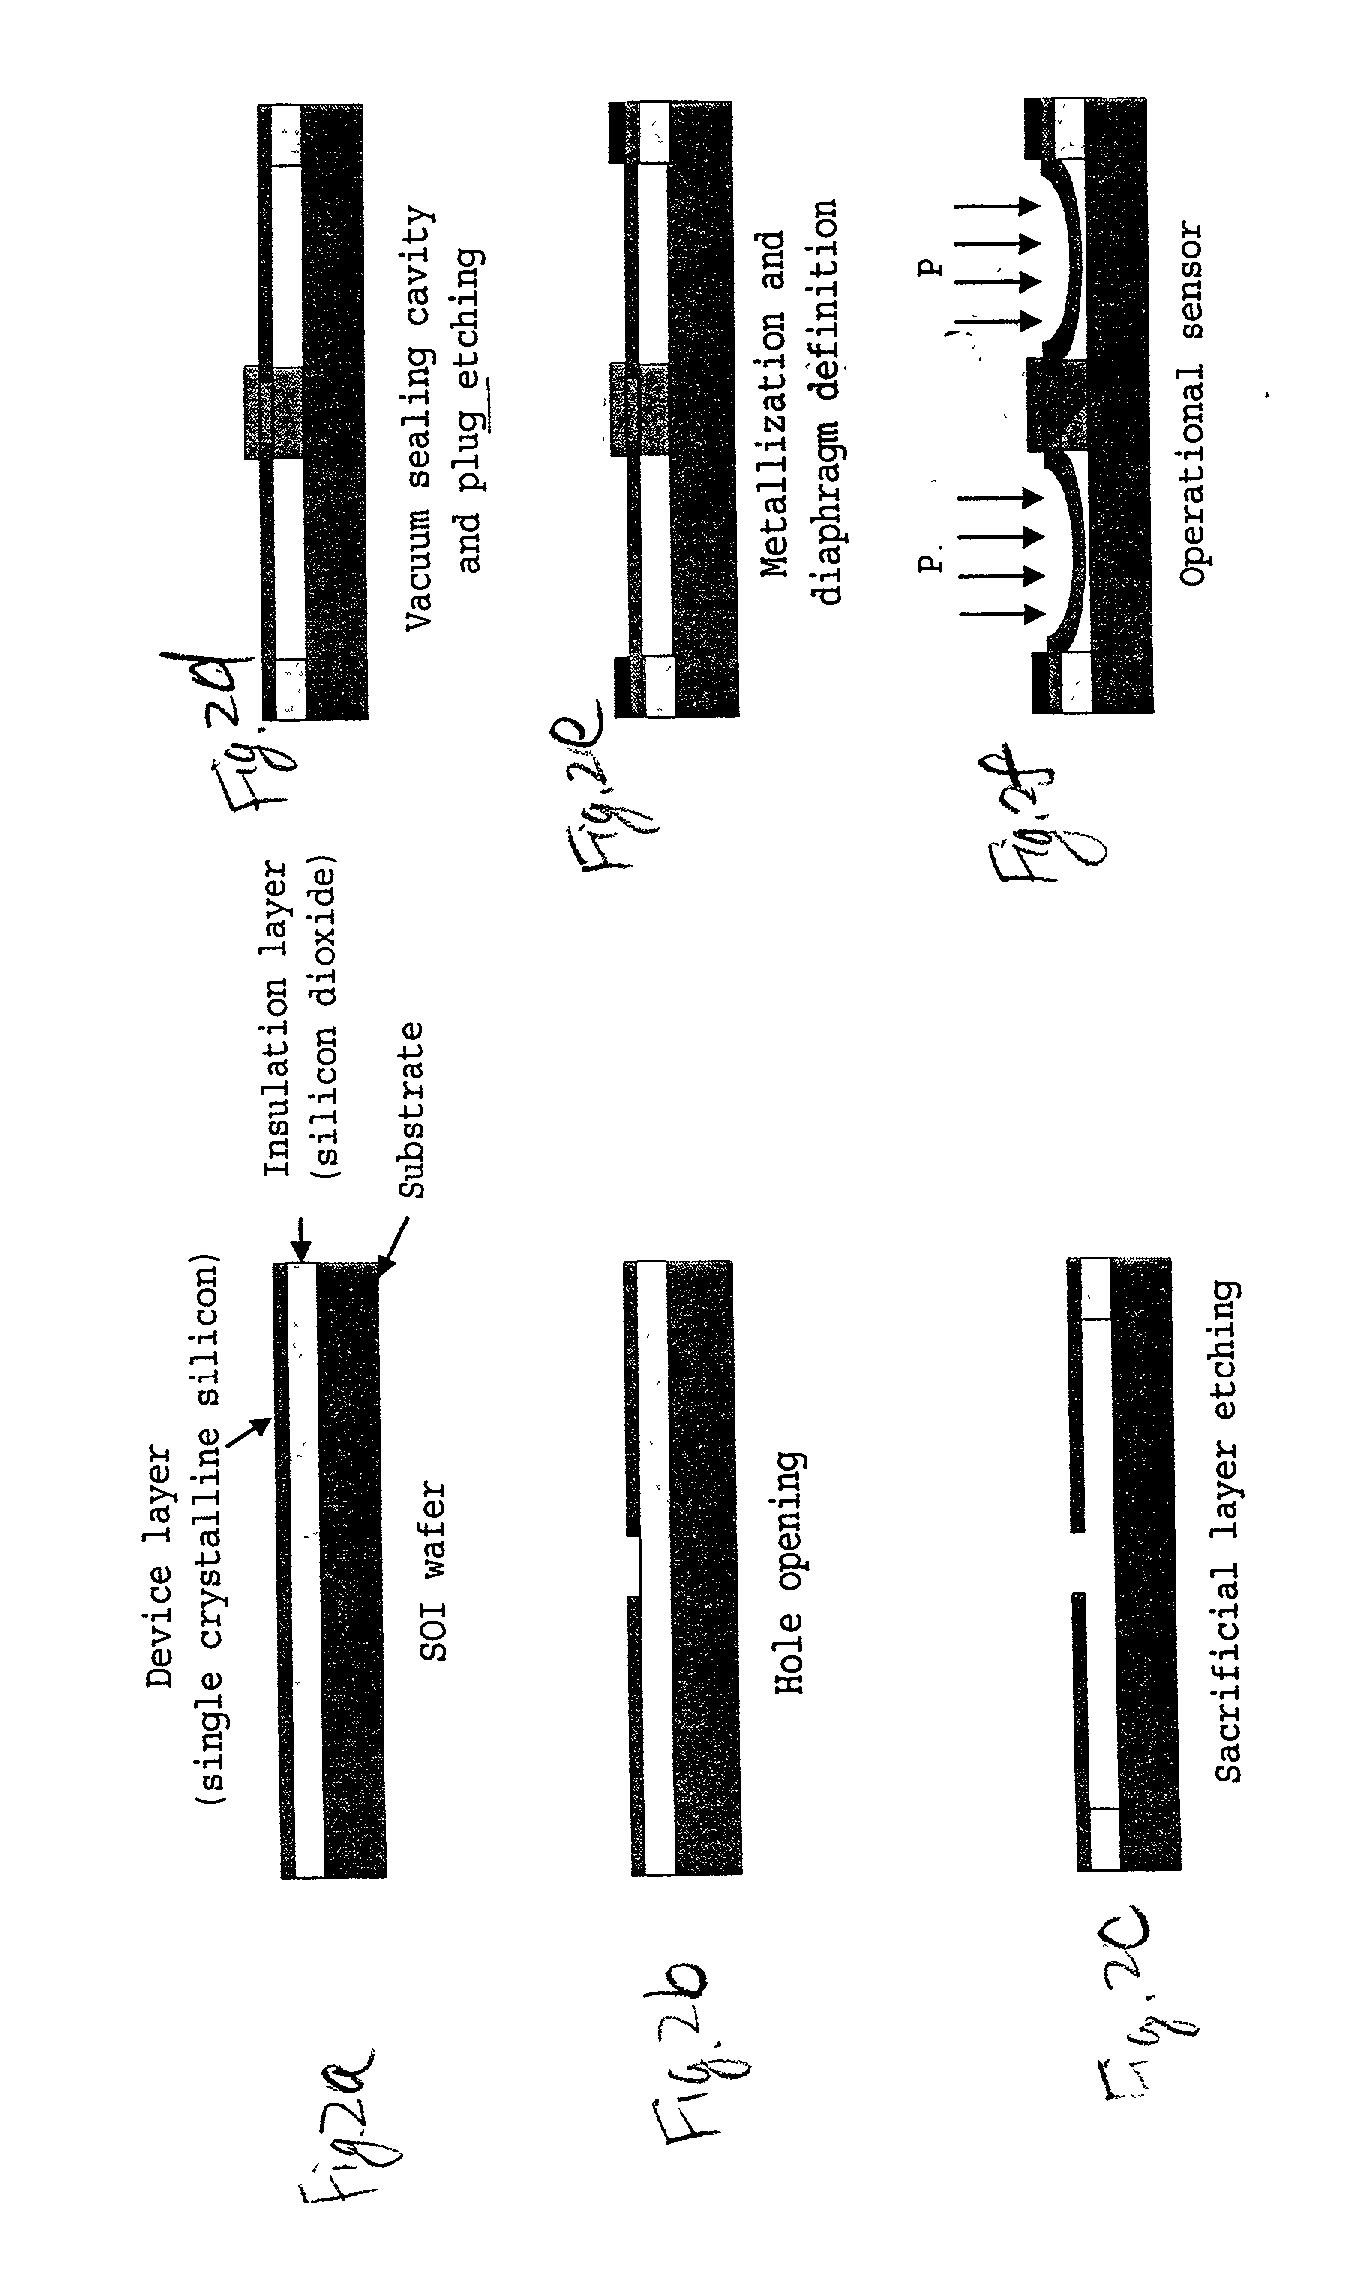 Triple layer isolation for silicon microstructure and structures formed using the same